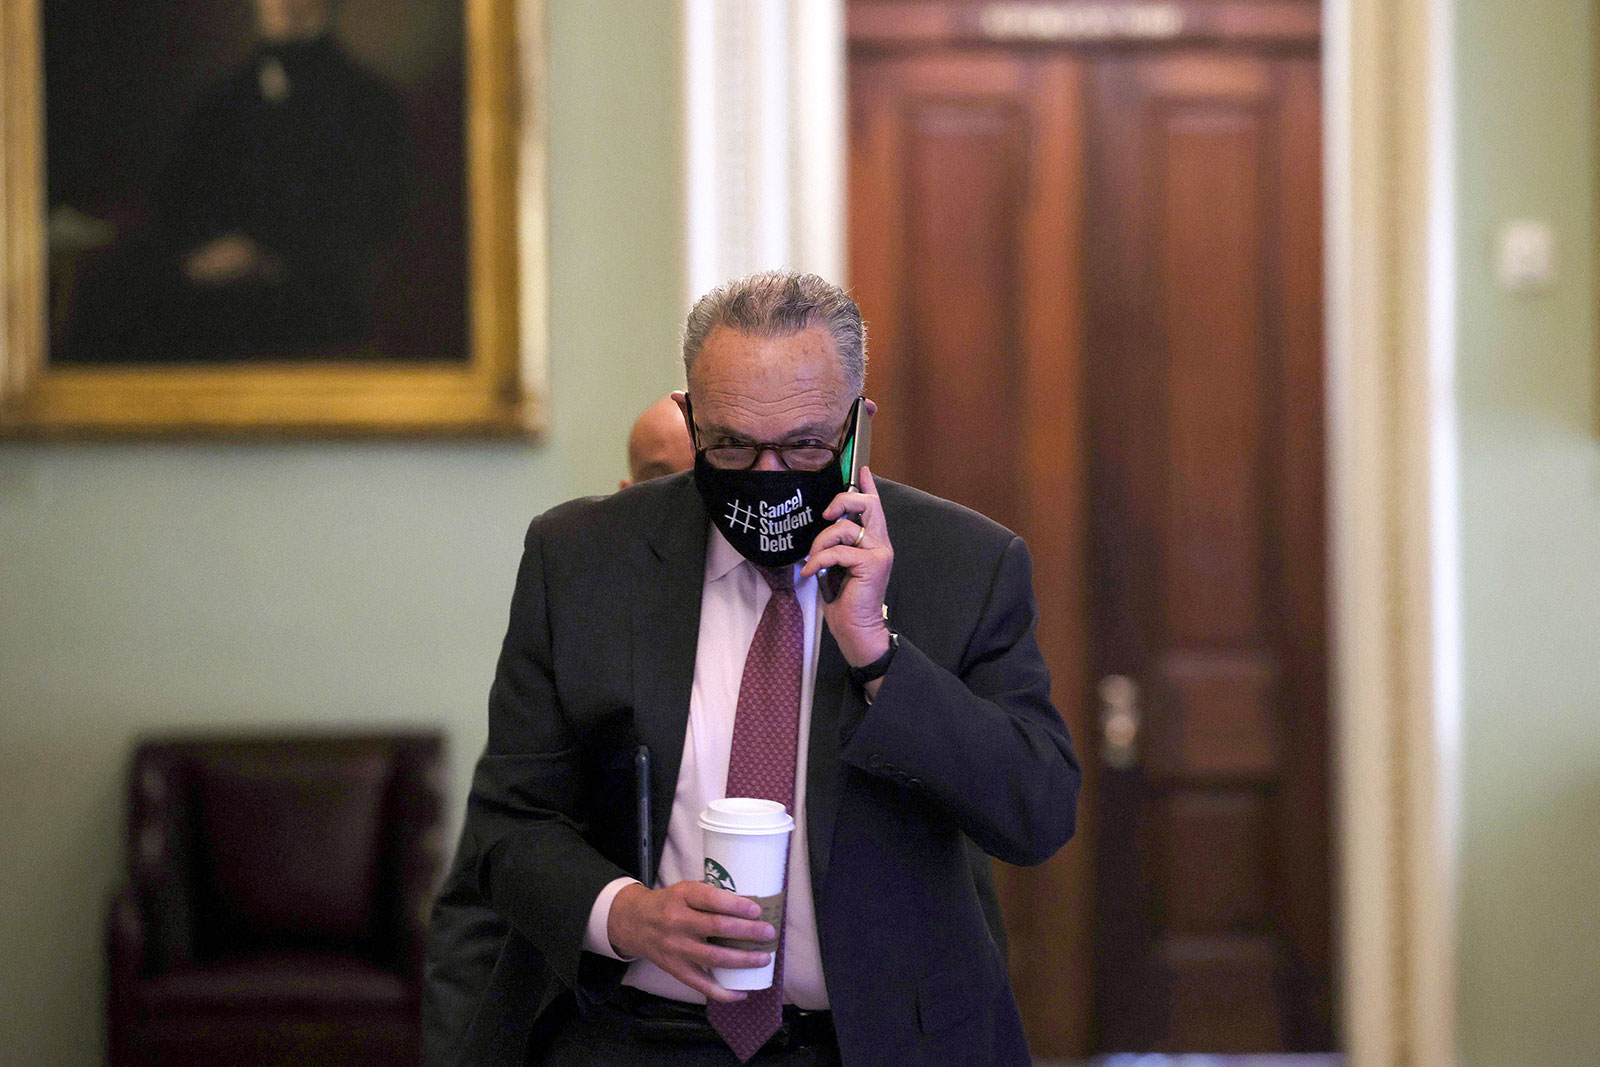 Senate Majority Leader Chuck Schumer arrives at the US Capitol on May 13.